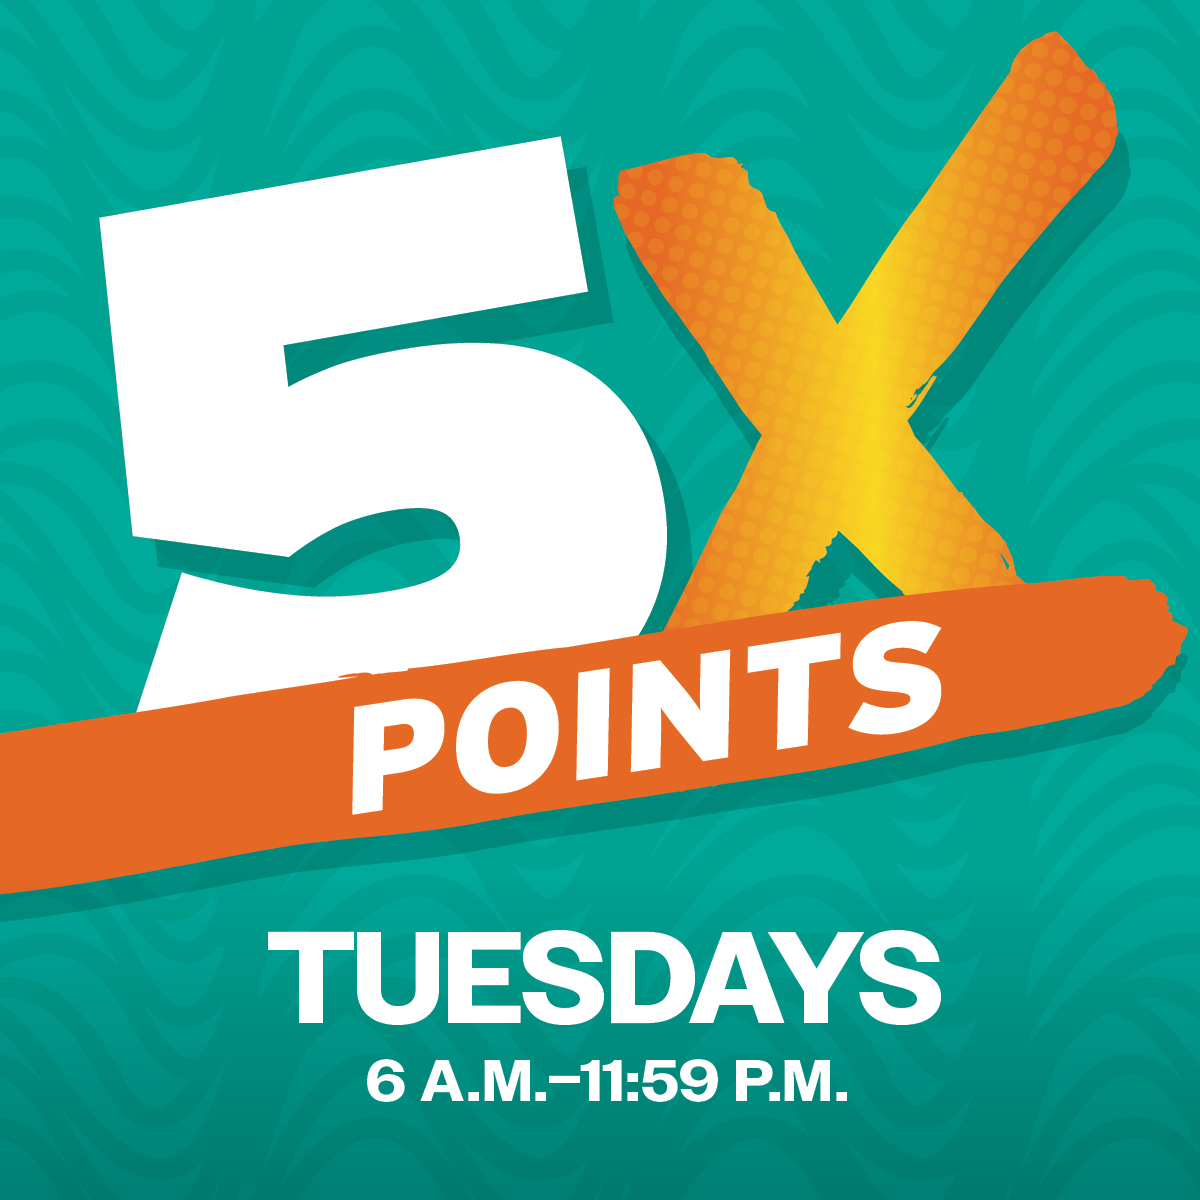 Spin, win, and multiply your points!